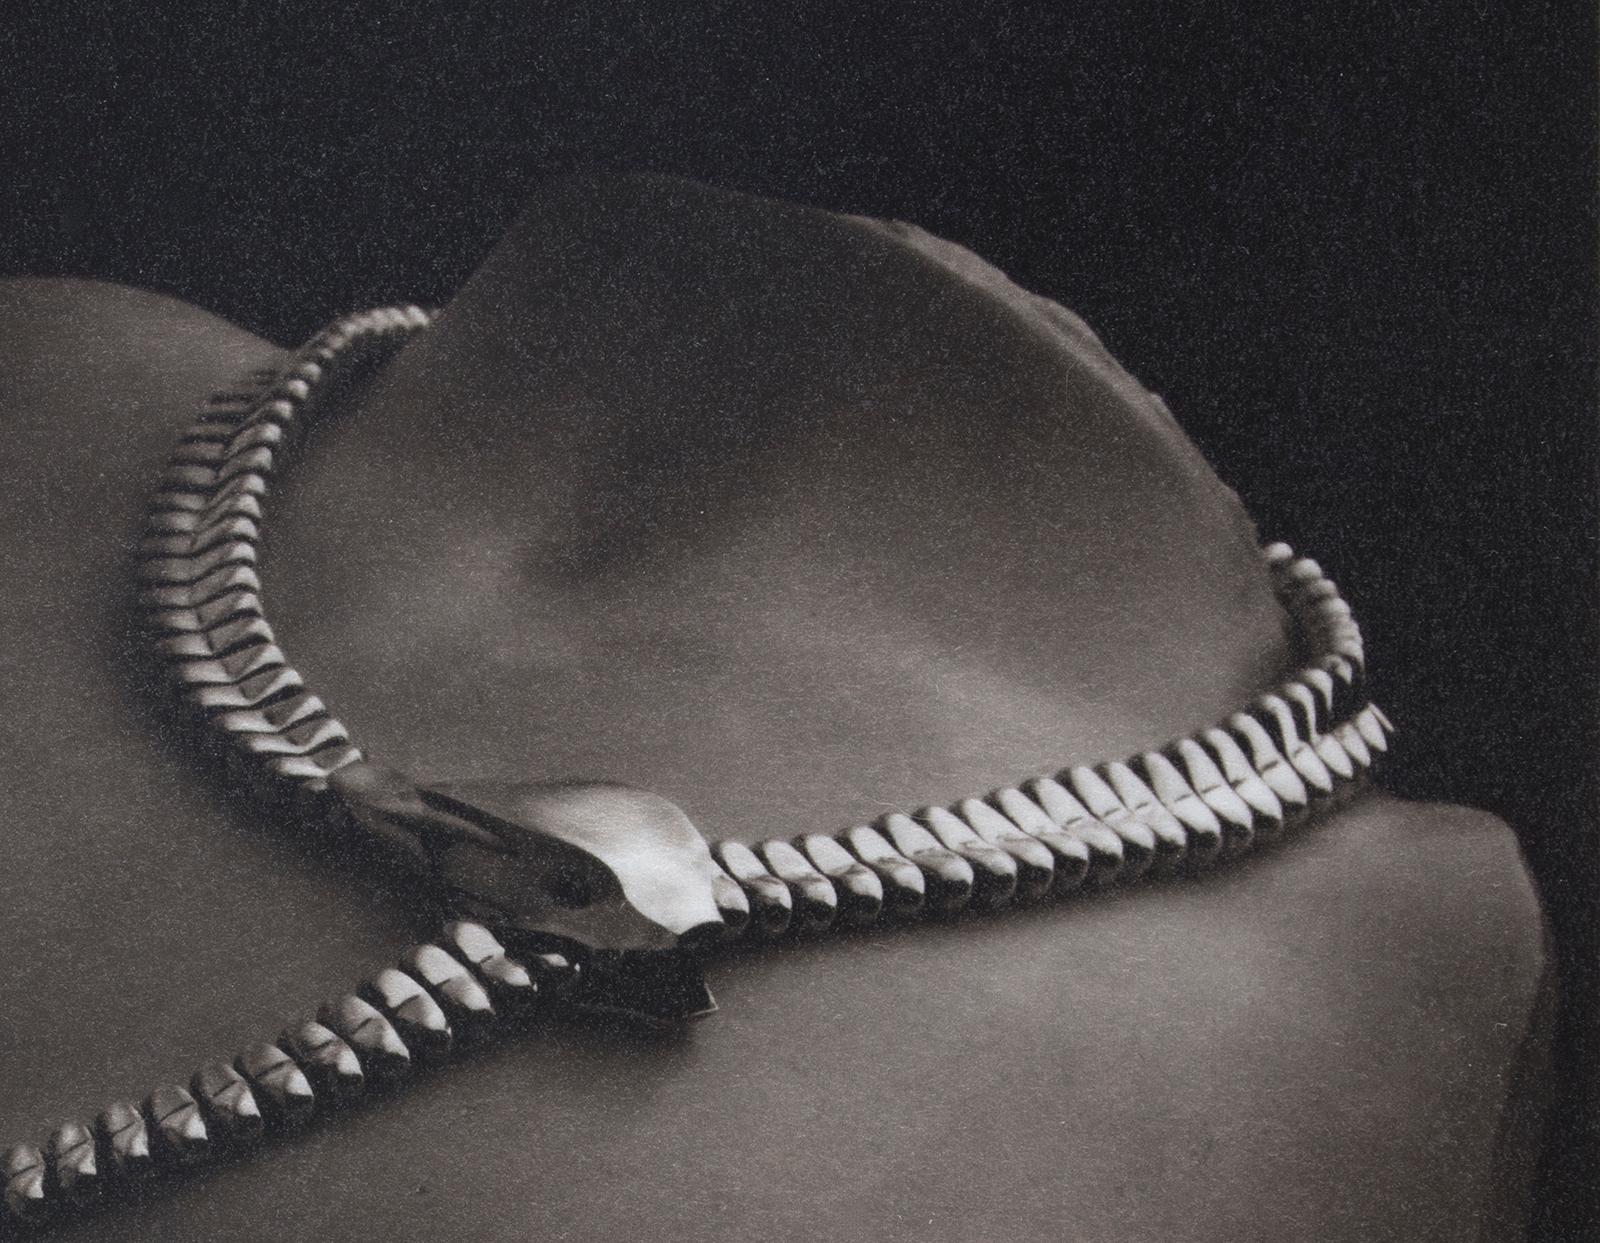 Snake-Platinum Palladium print on vellum over silver, A/P, Limited edition, Jewelry - Photograph by Ian Sanderson